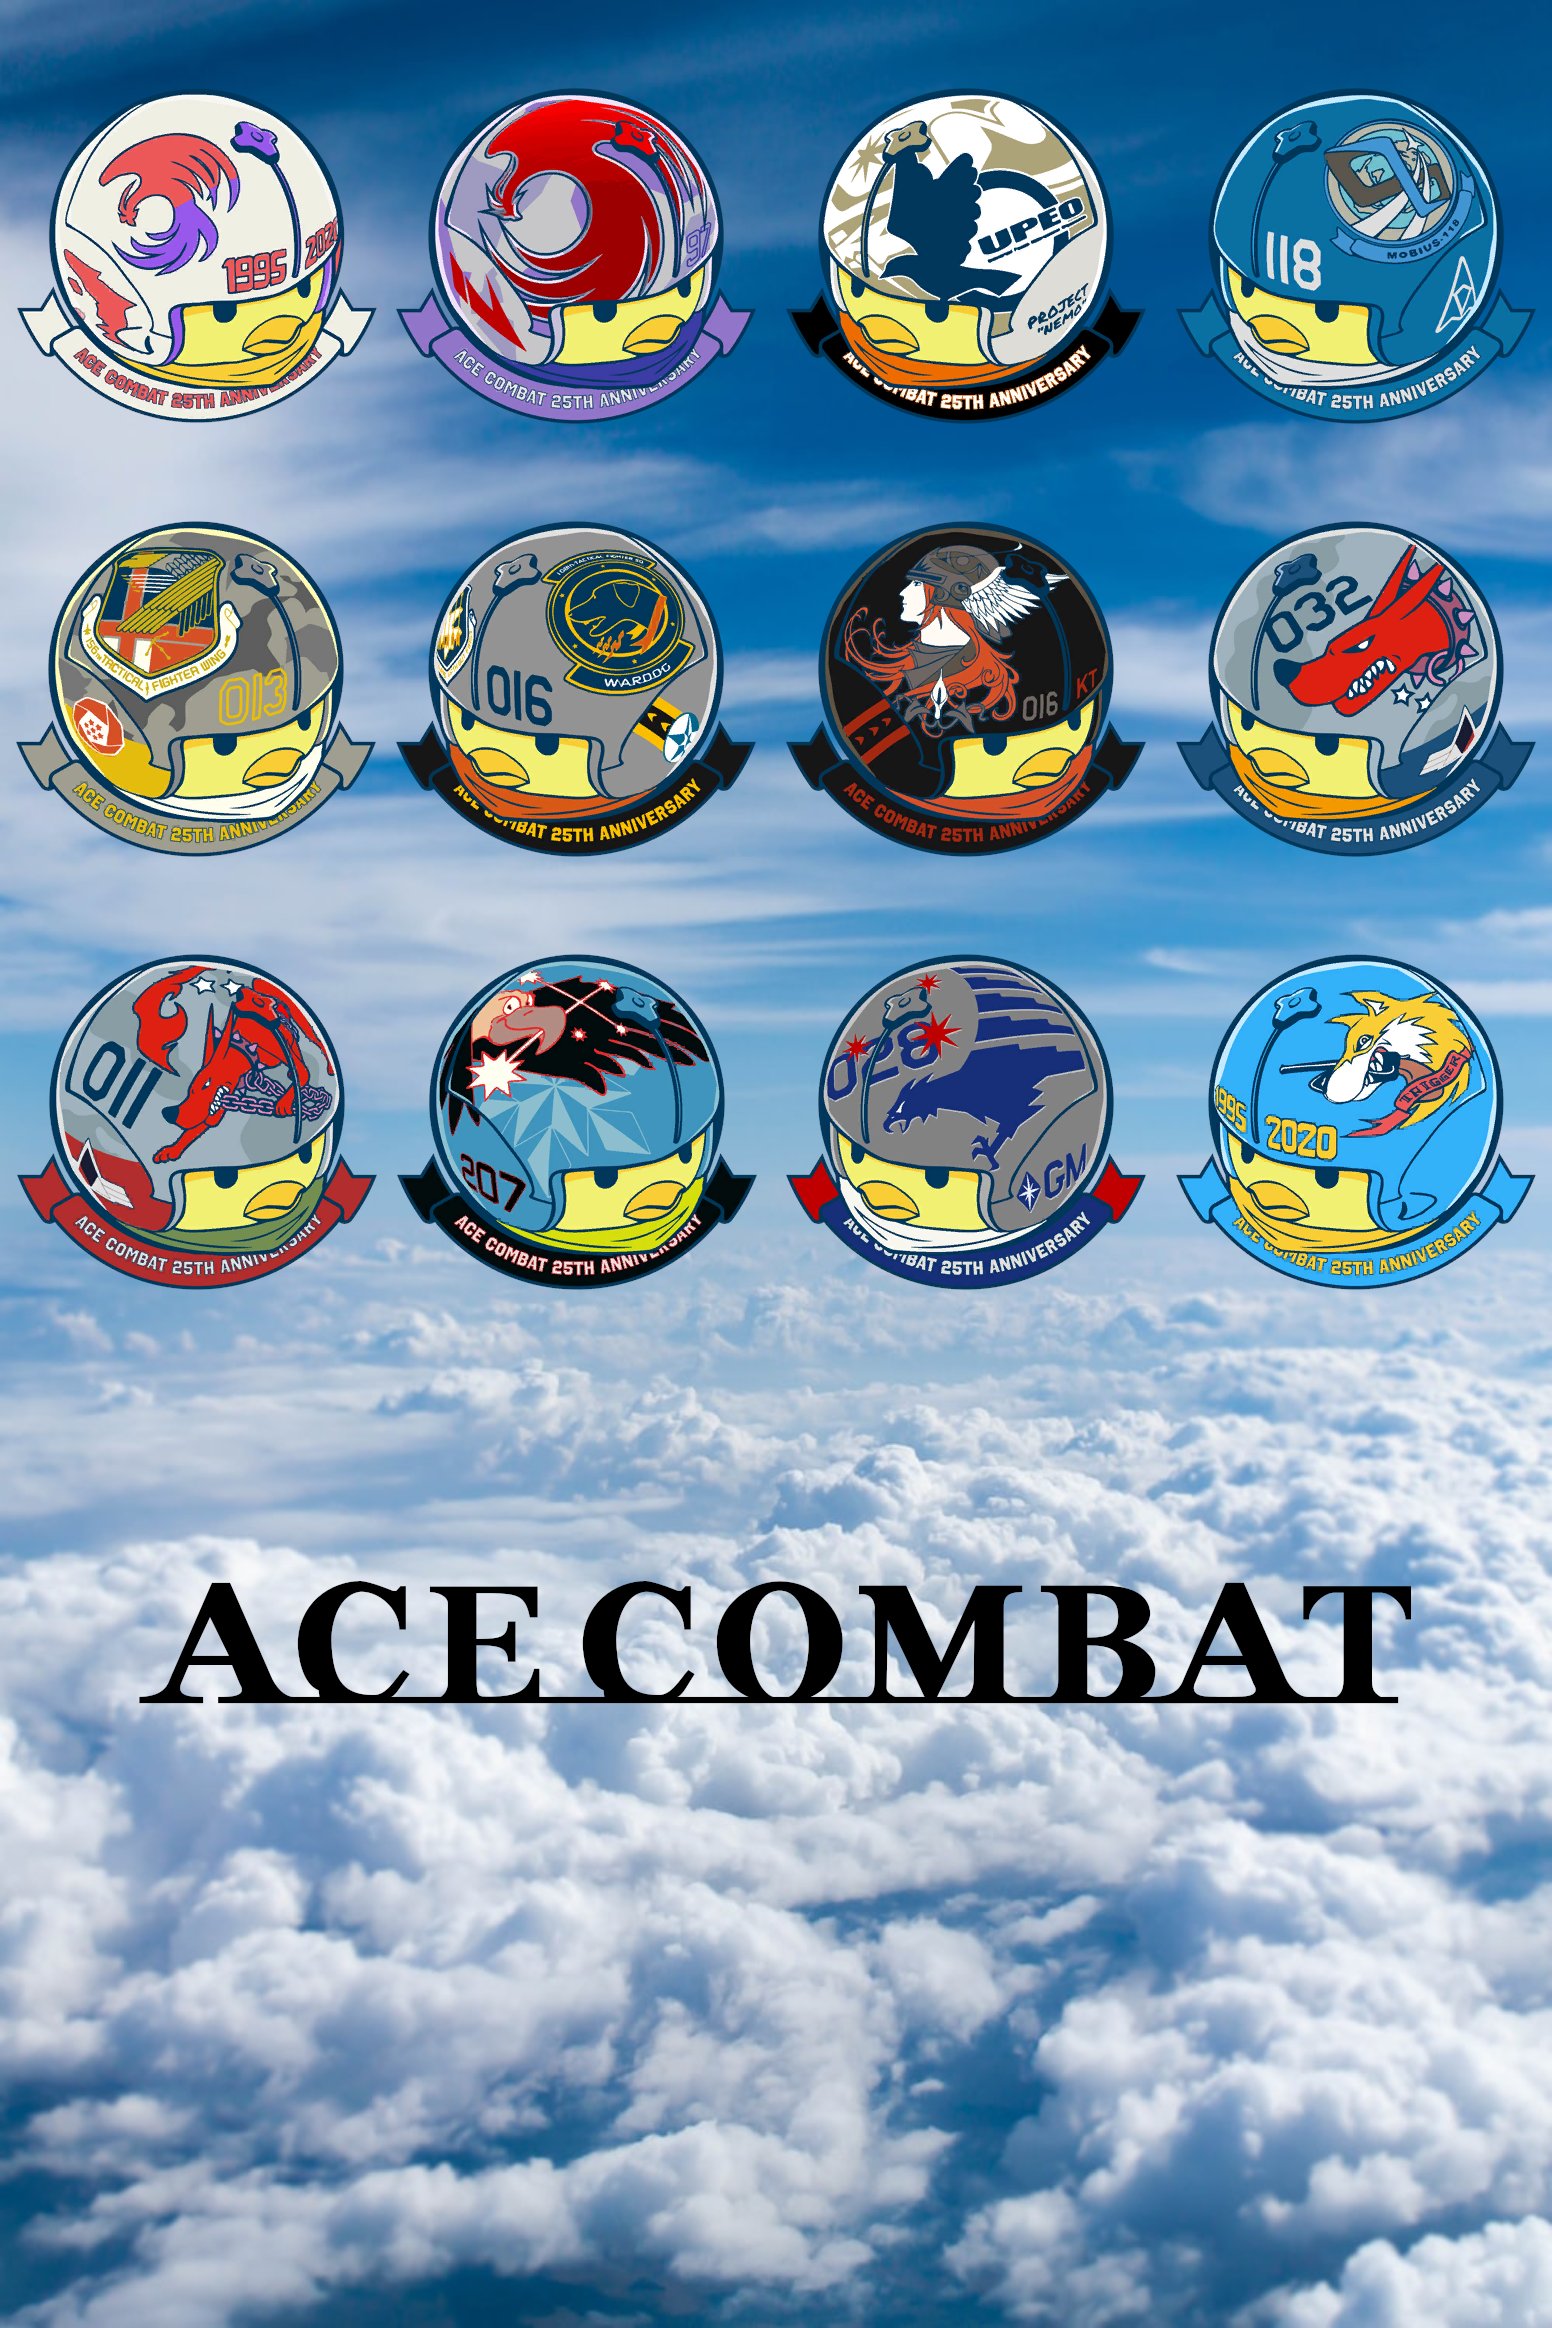 aflevere Thorny forhold Ace Combat Fan 🇧🇷🇨🇦🛫 on Twitter: "RT @ea_18g_growlers: Thanks you  @PROJECT_ACES &lt;3 https://t.co/79j3lL1yNe" / Twitter